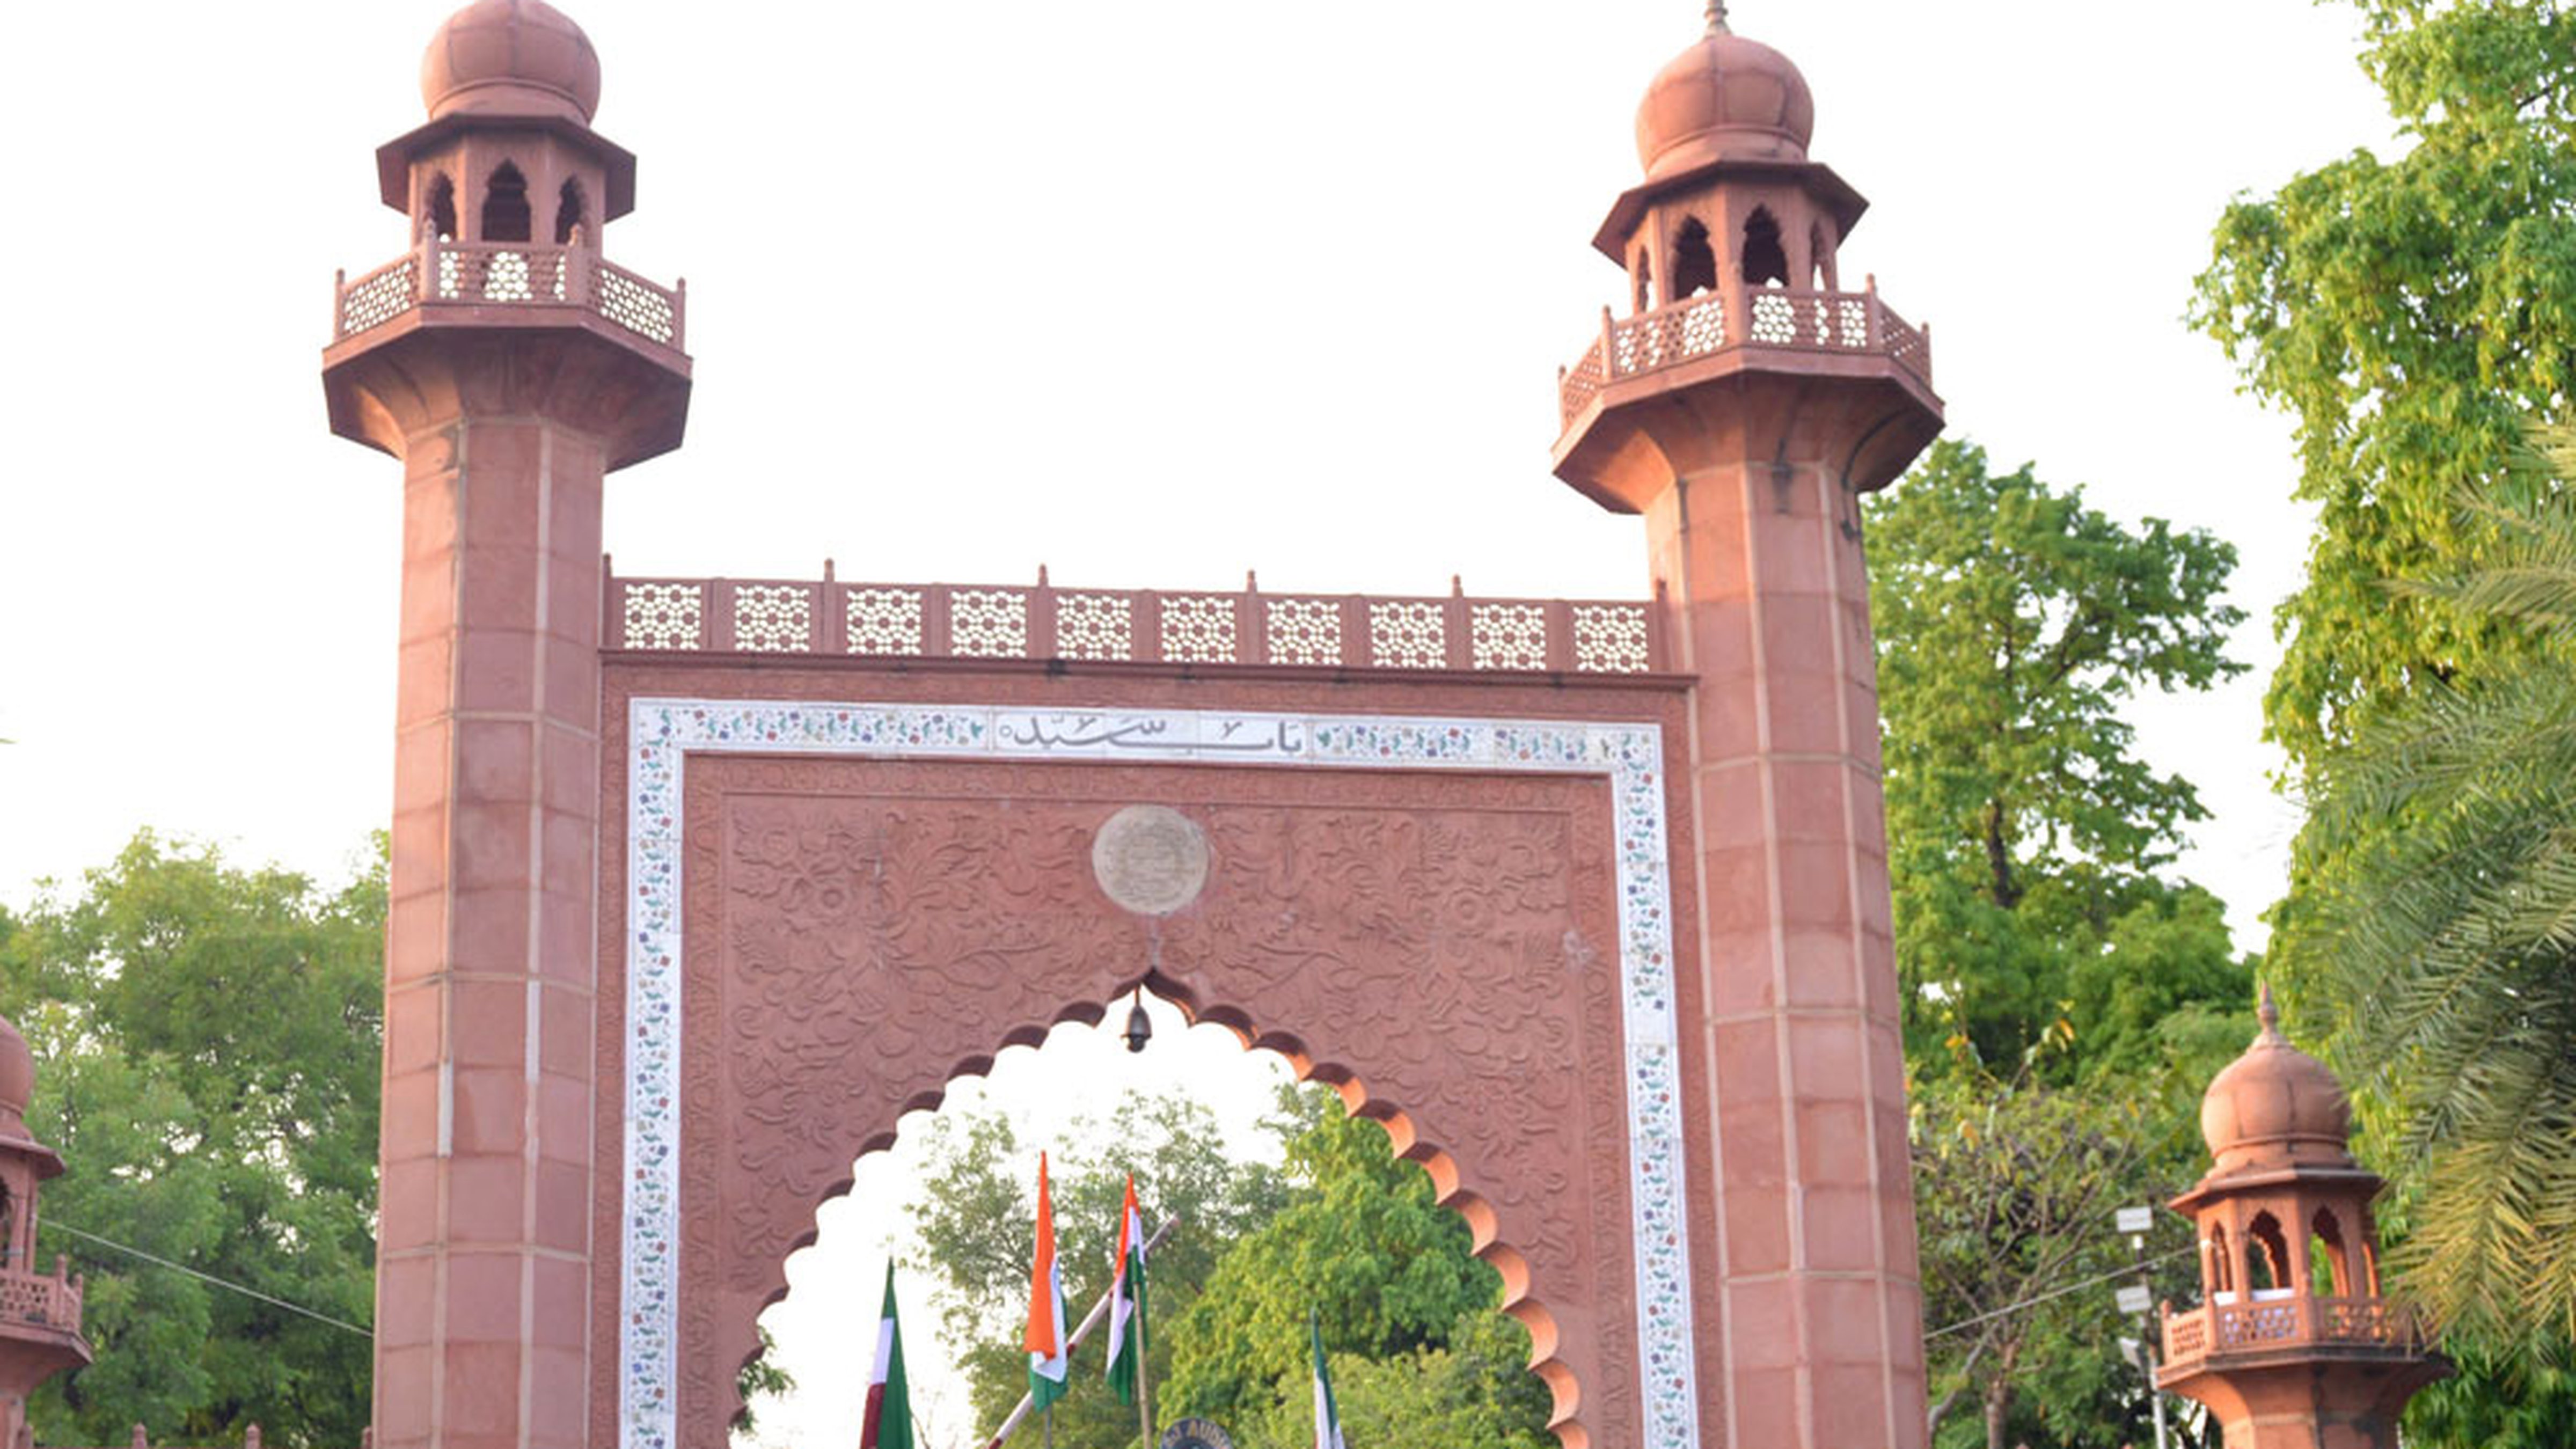 The Supreme Court on Tuesday referred to a seven-judge bench the question whether Aligarh Muslim University could be accorded the status of a “minority” institute.